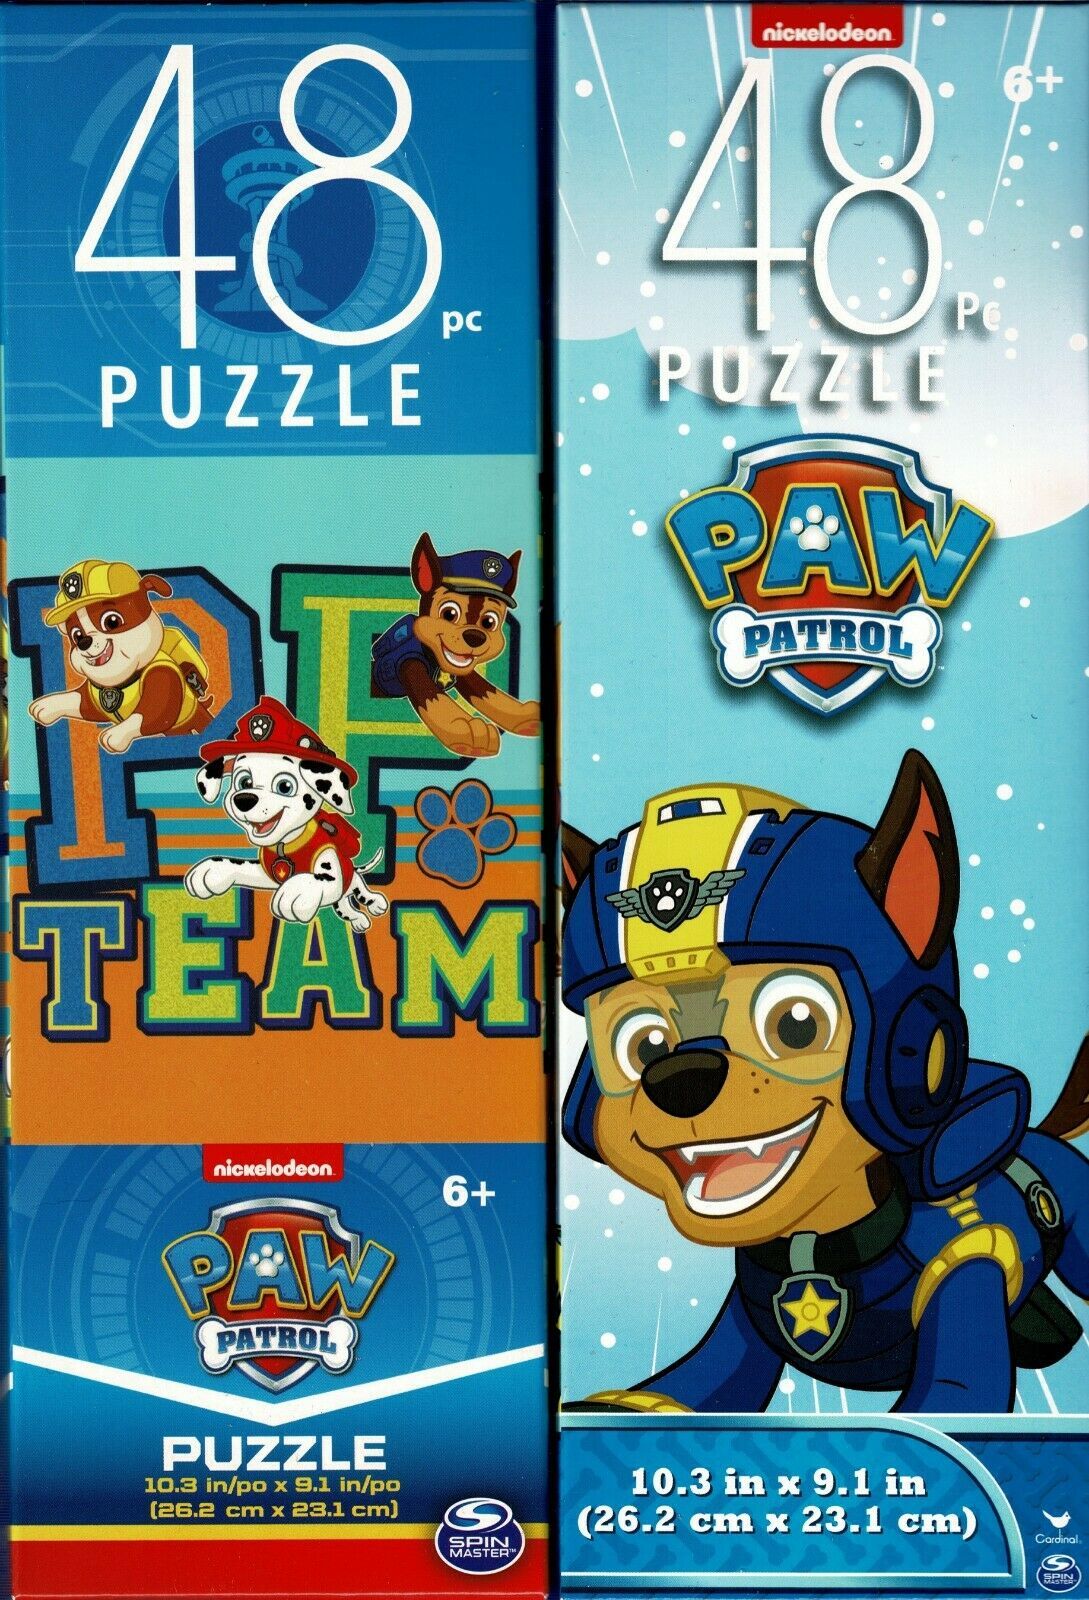 Primary image for Nickelodeon Paw Patrol - 48 Pieces Jigsaw Puzzle v5 (Set of 2)